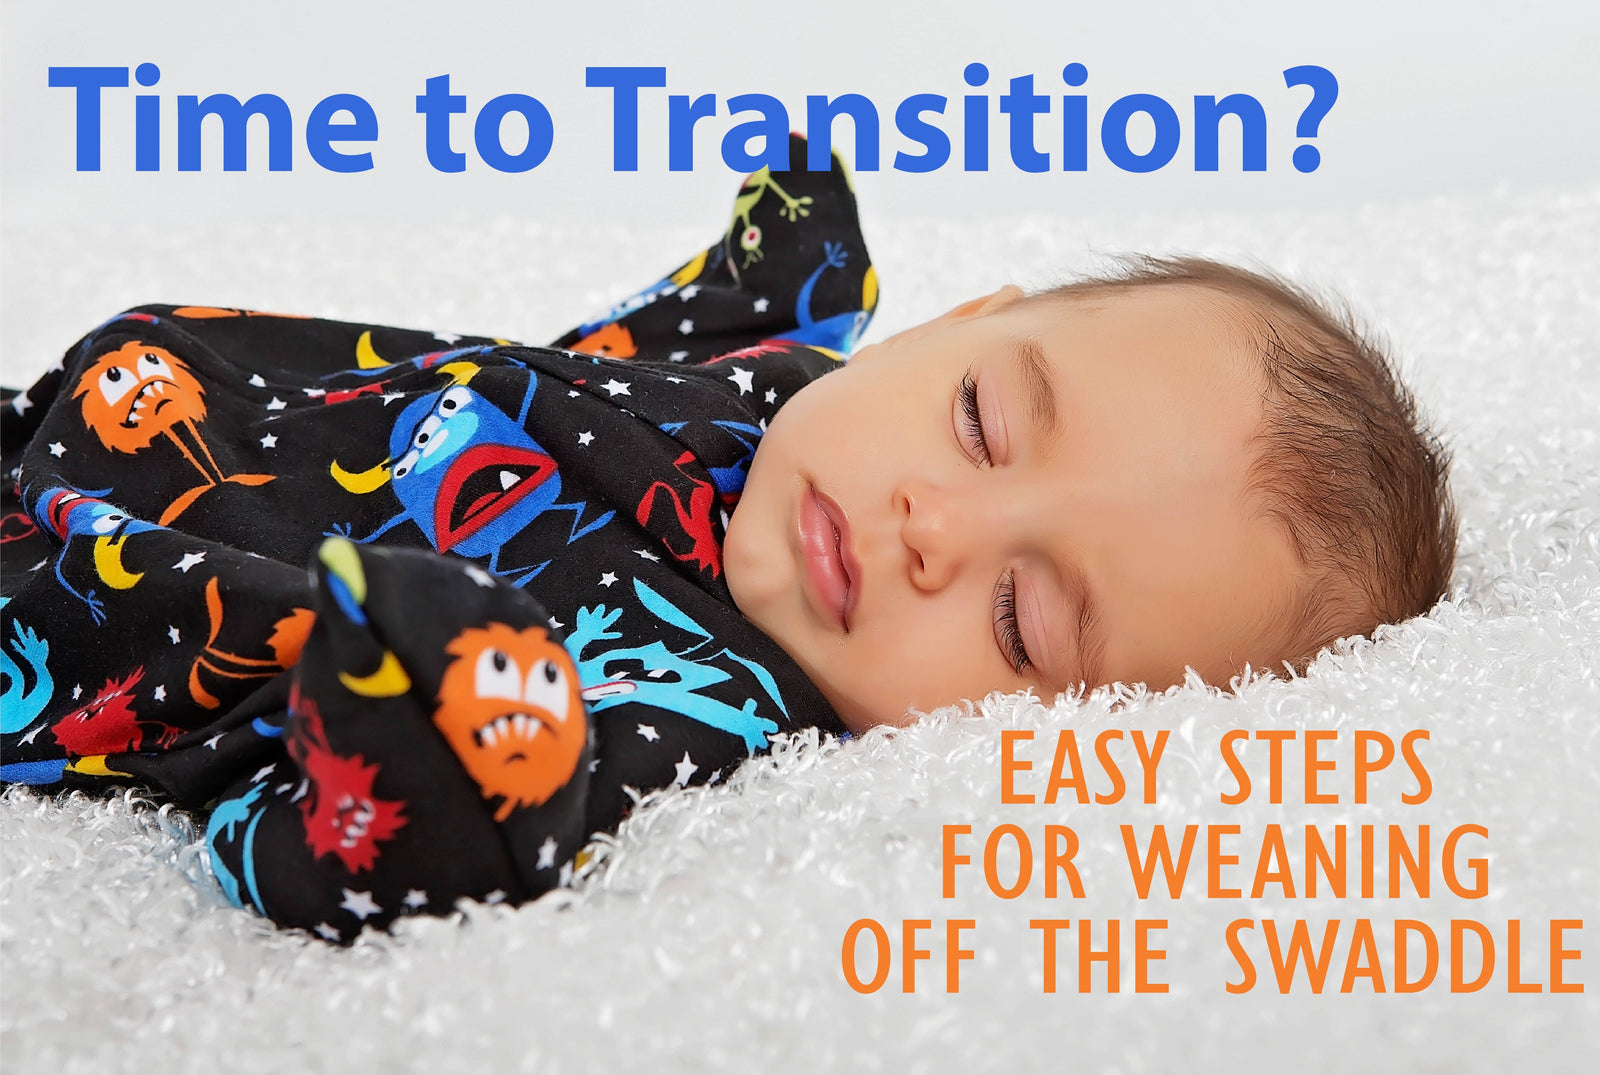 tips for weaning off the swaddle